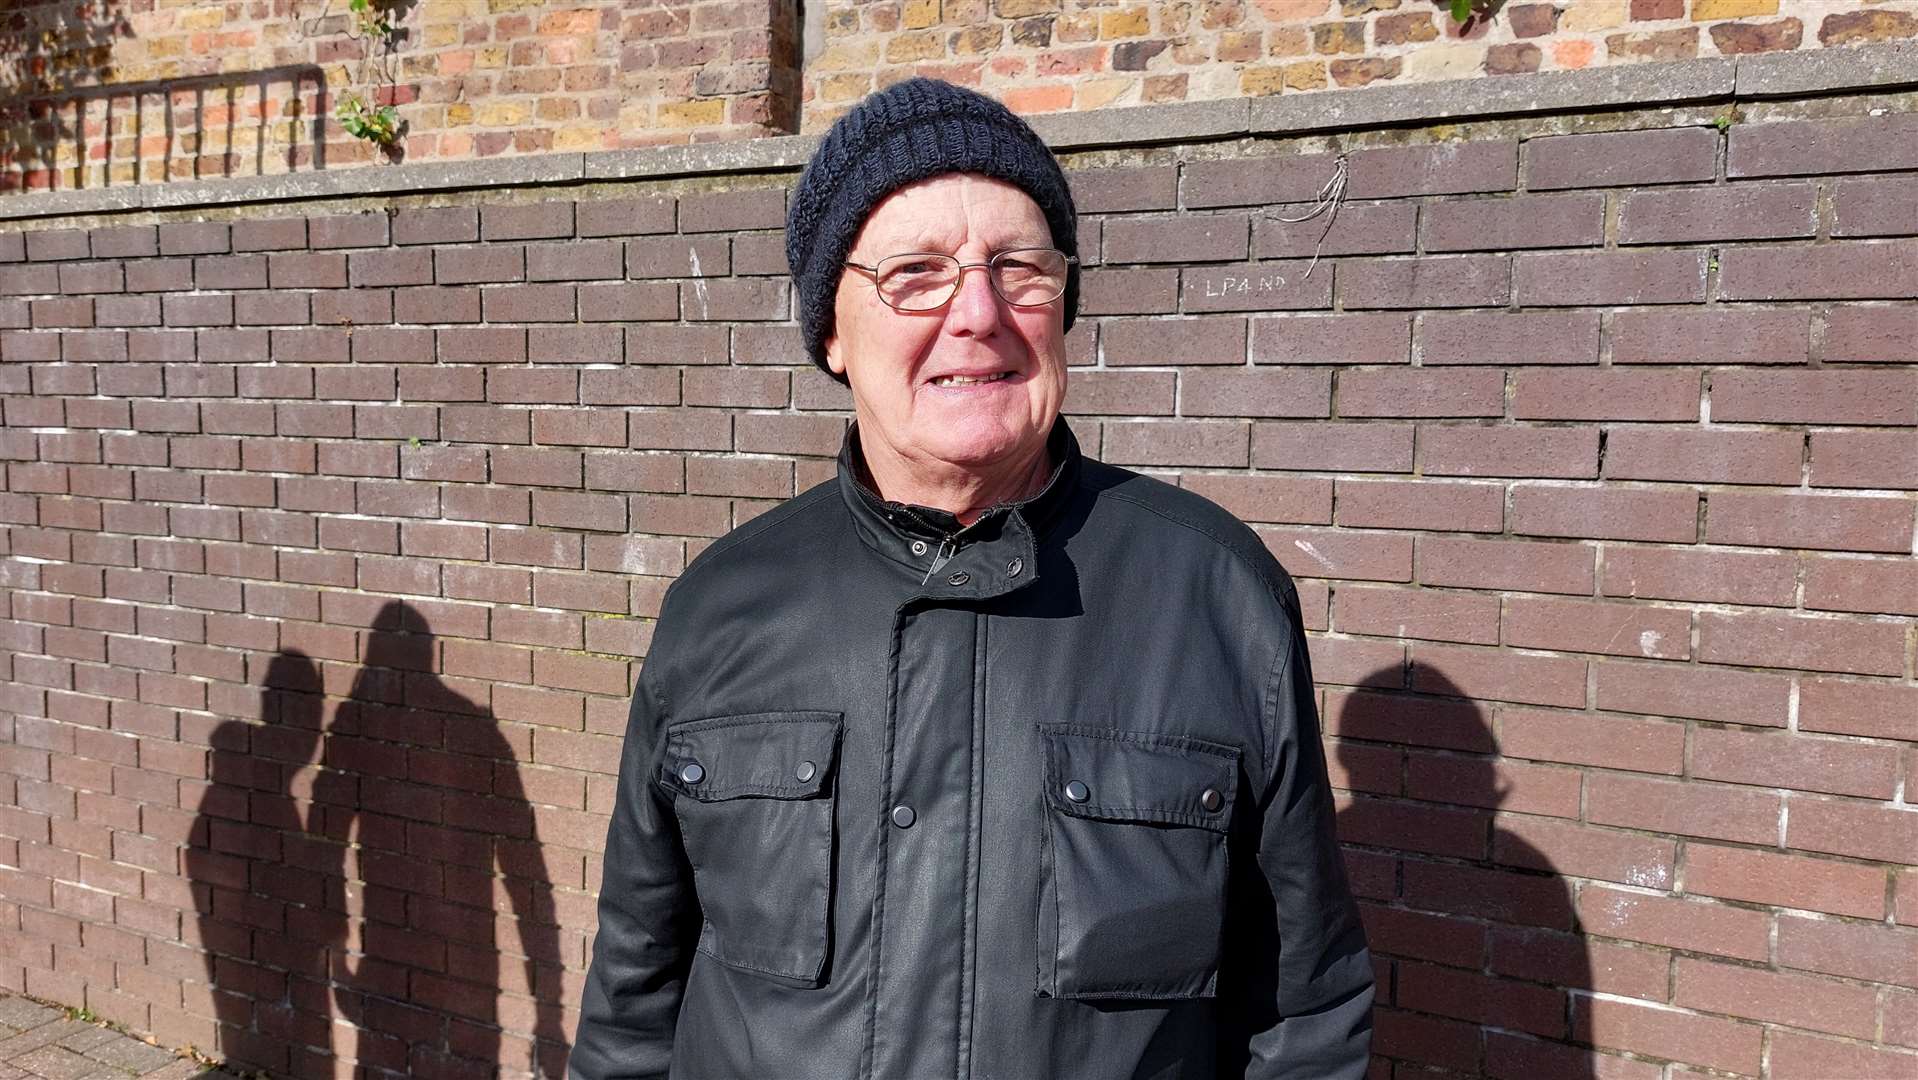 Peter, 78, from Dover, says he would rather speak to people than machines